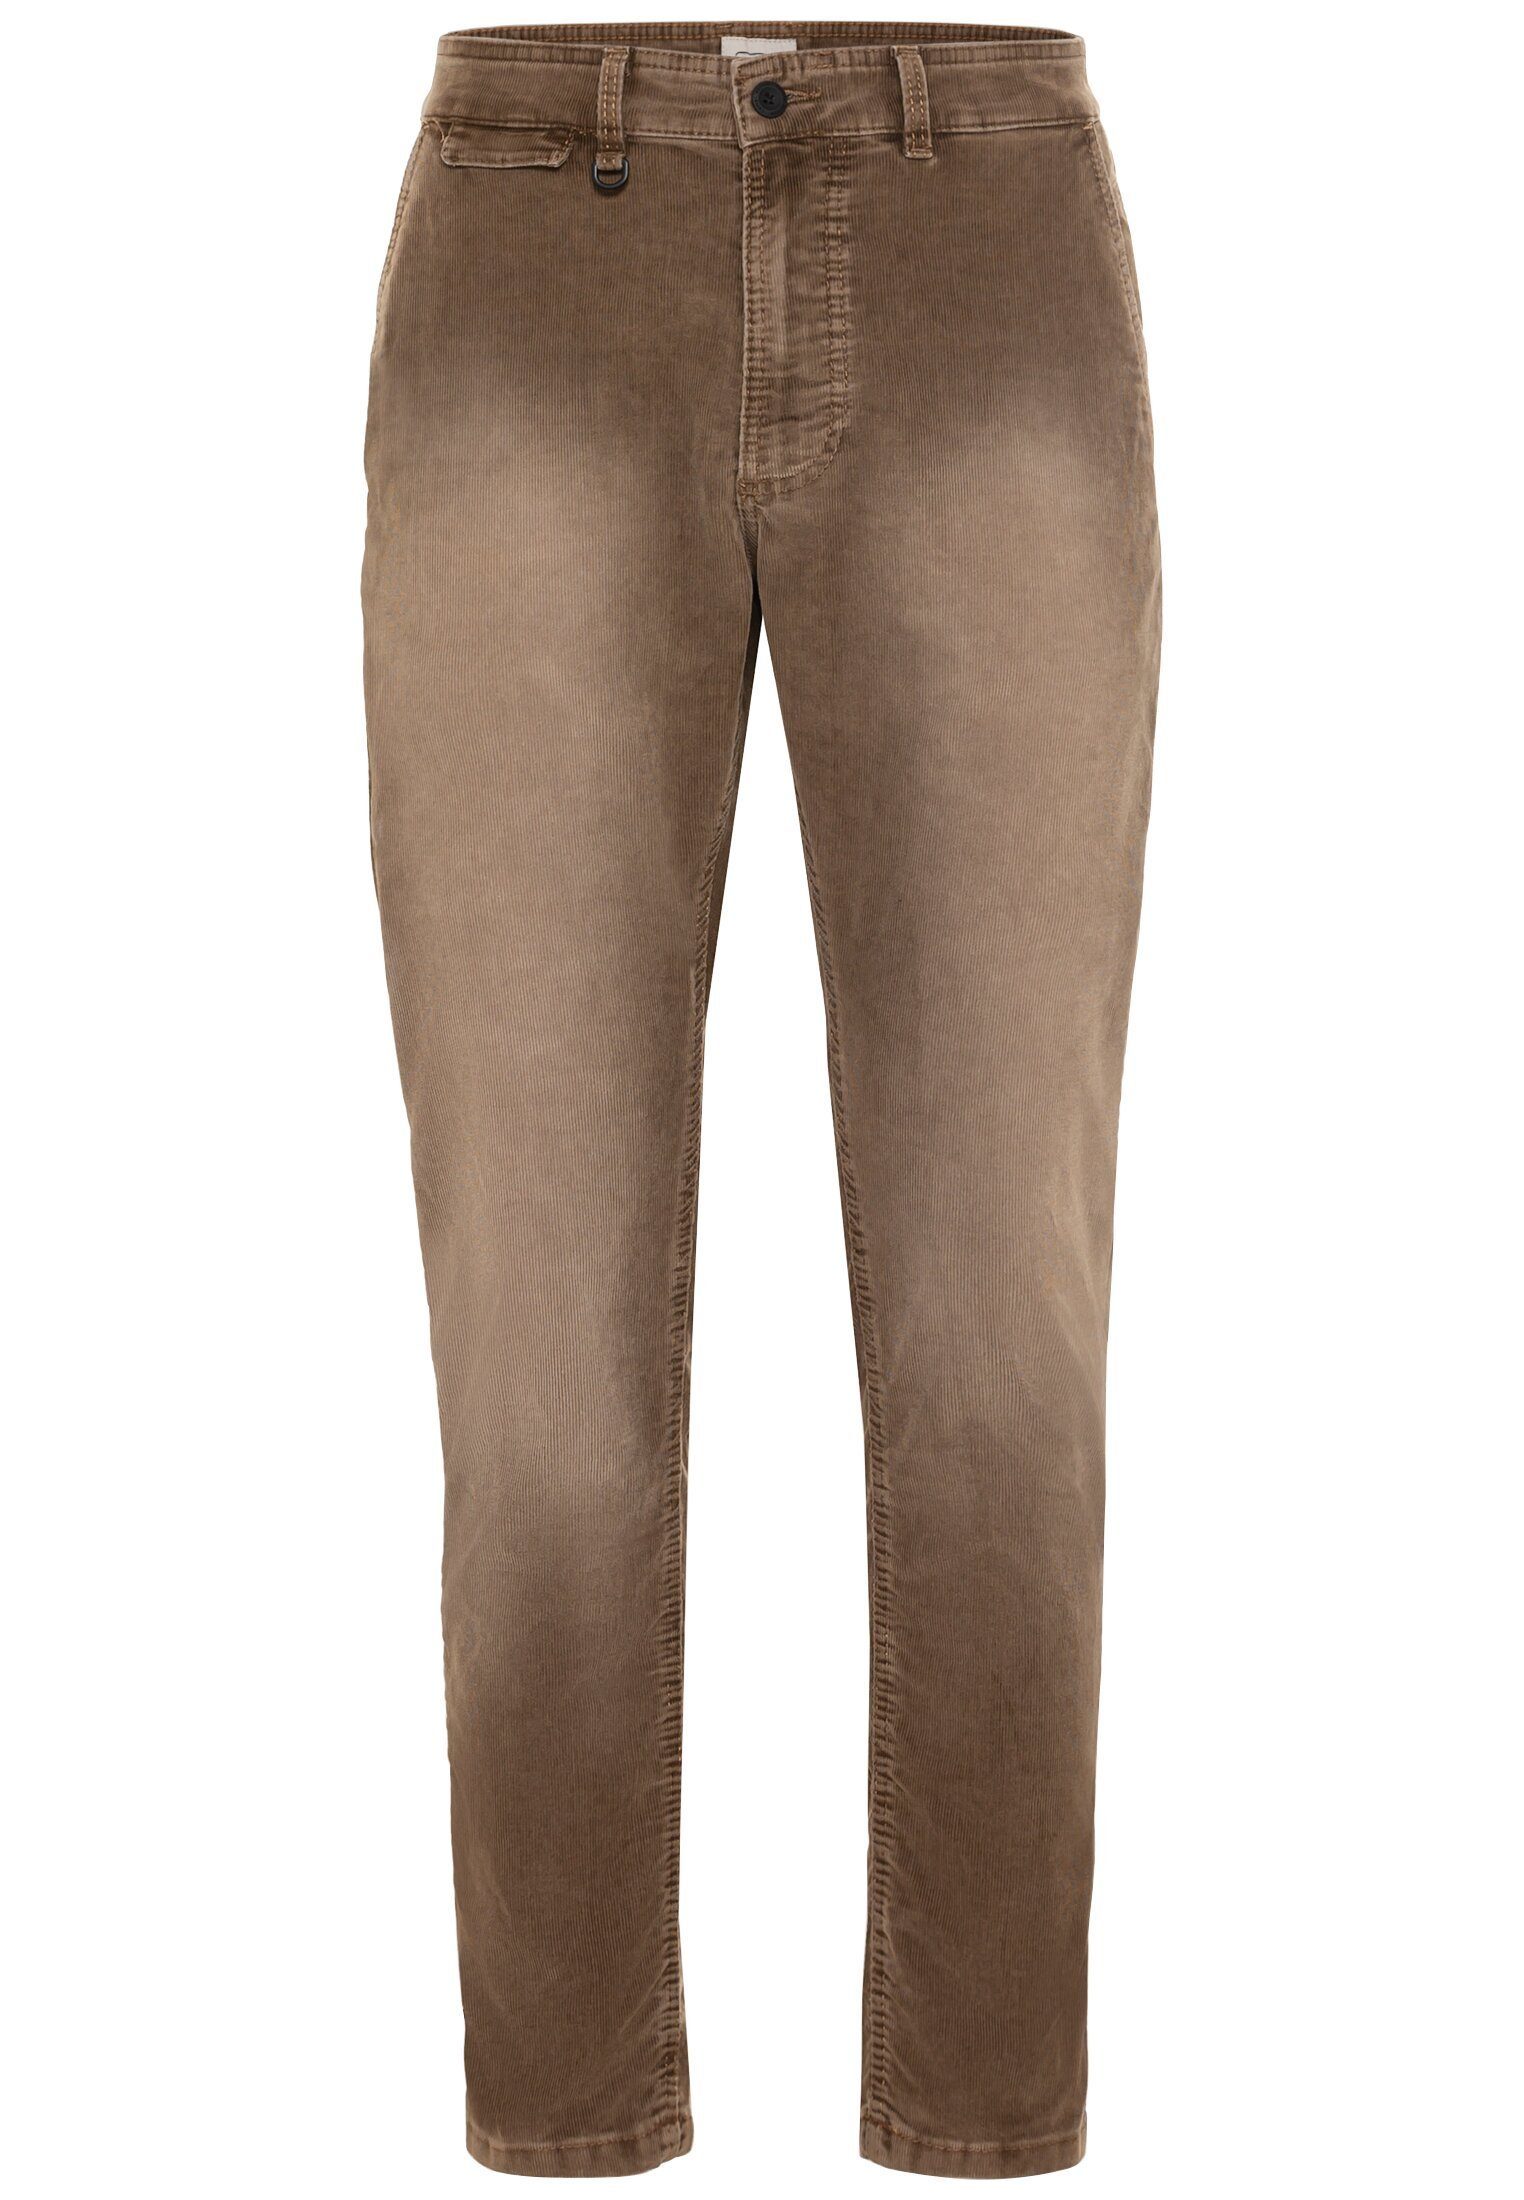 camel active Chinohose camel active Herren Fit Chino Tapered